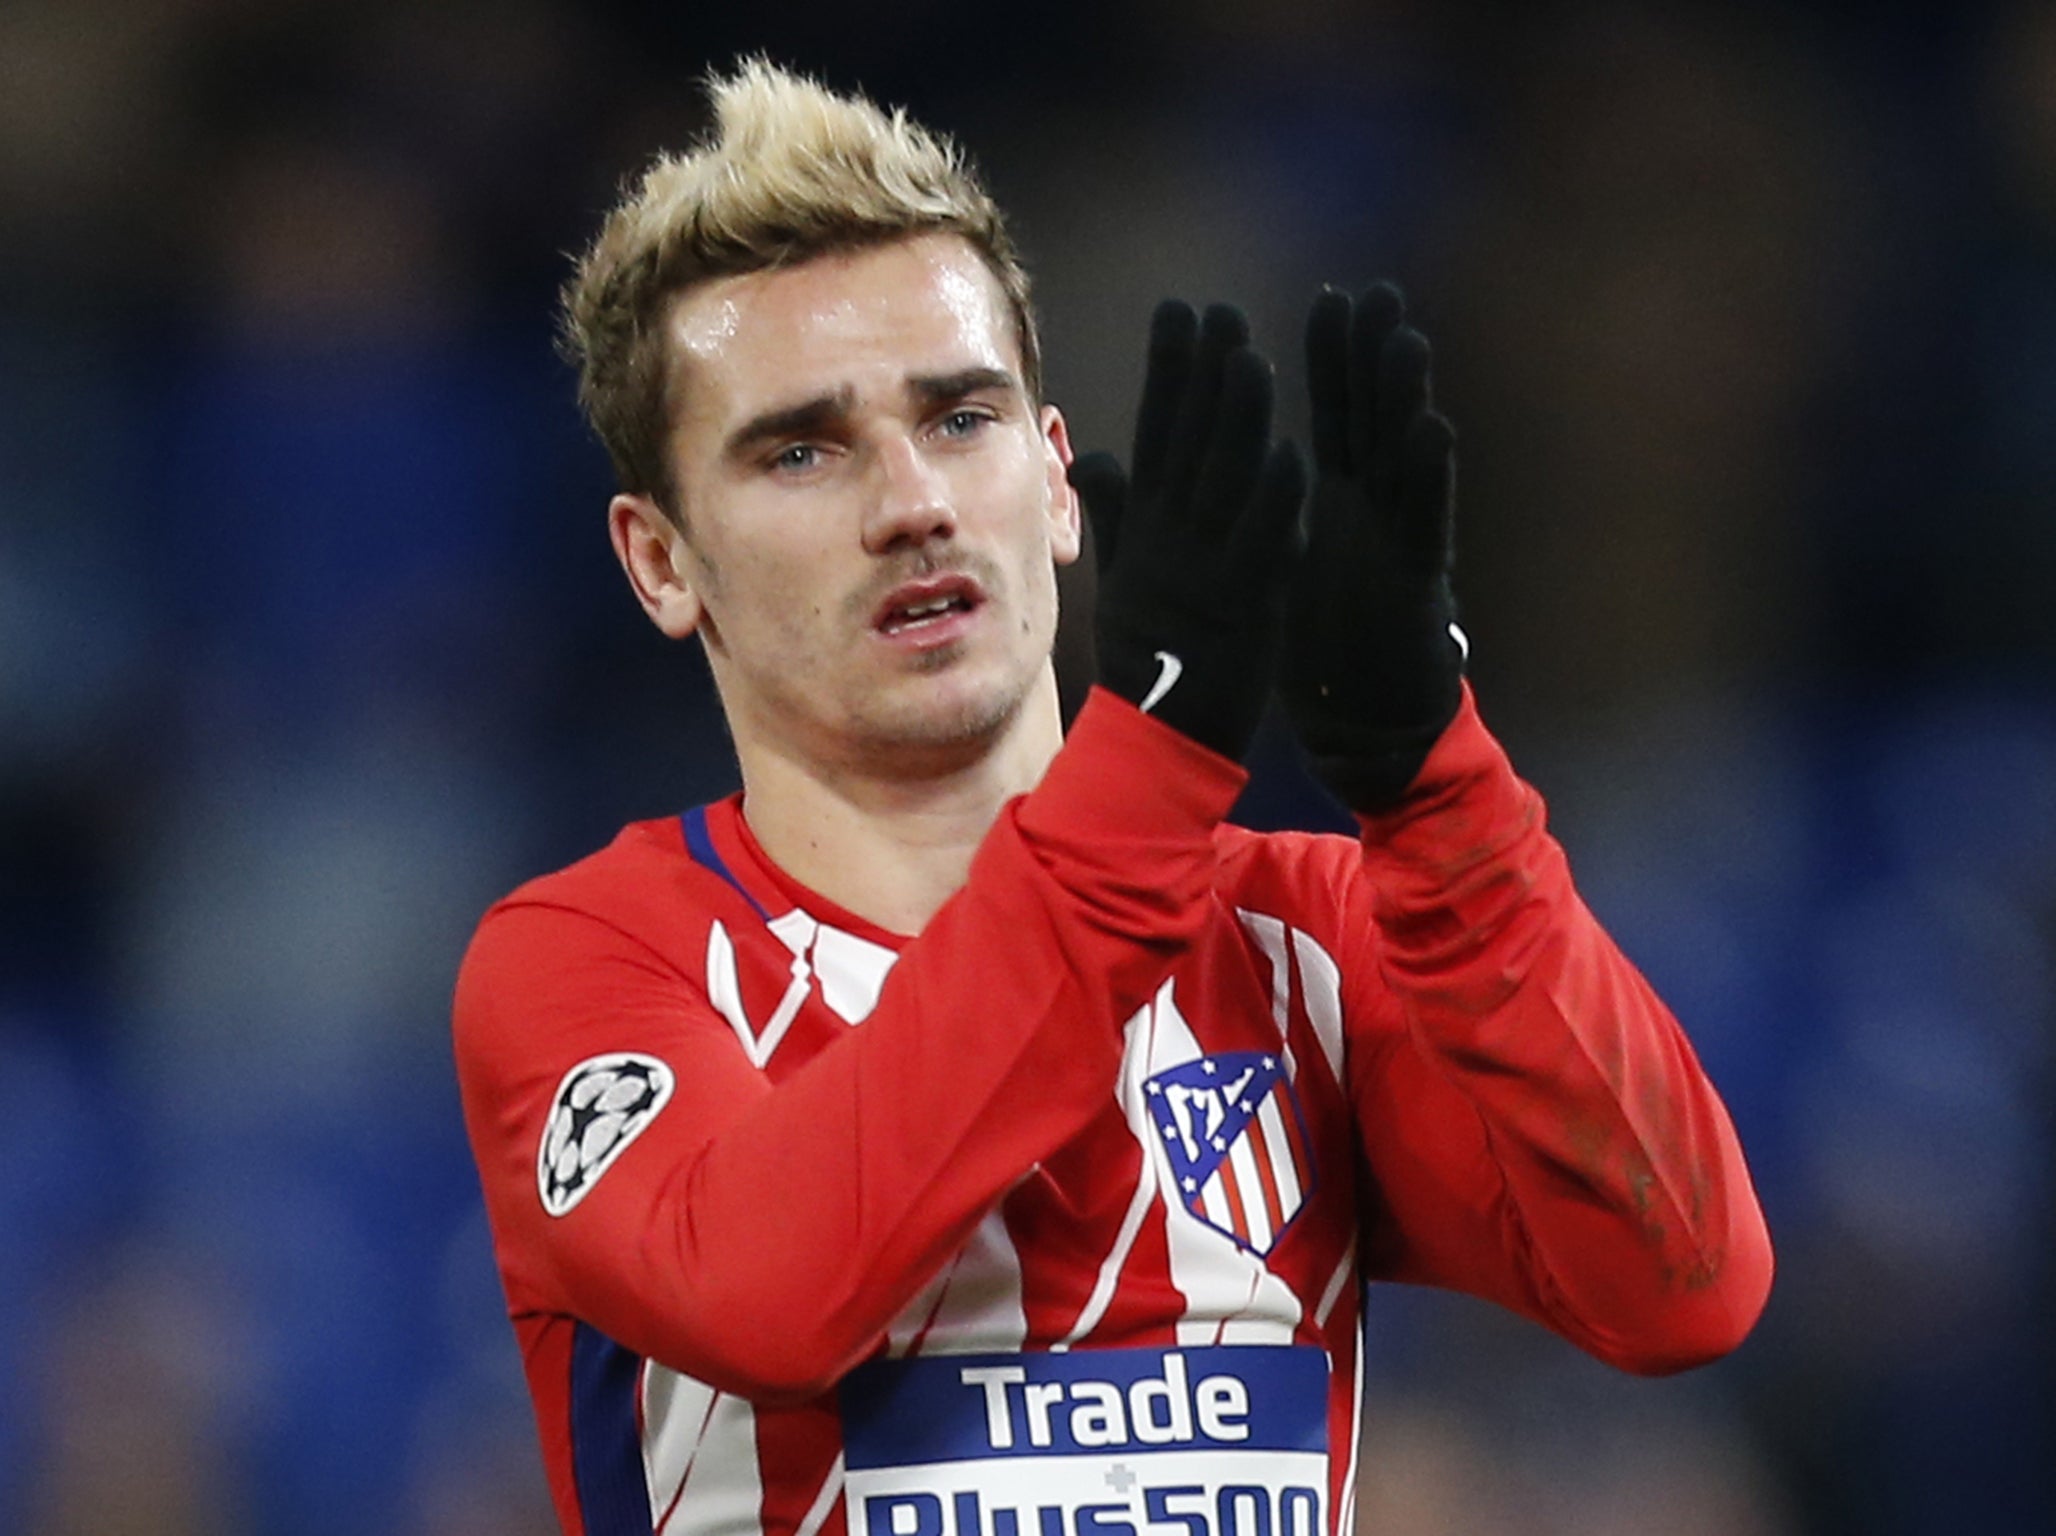 Griezmann made a promise to his sister